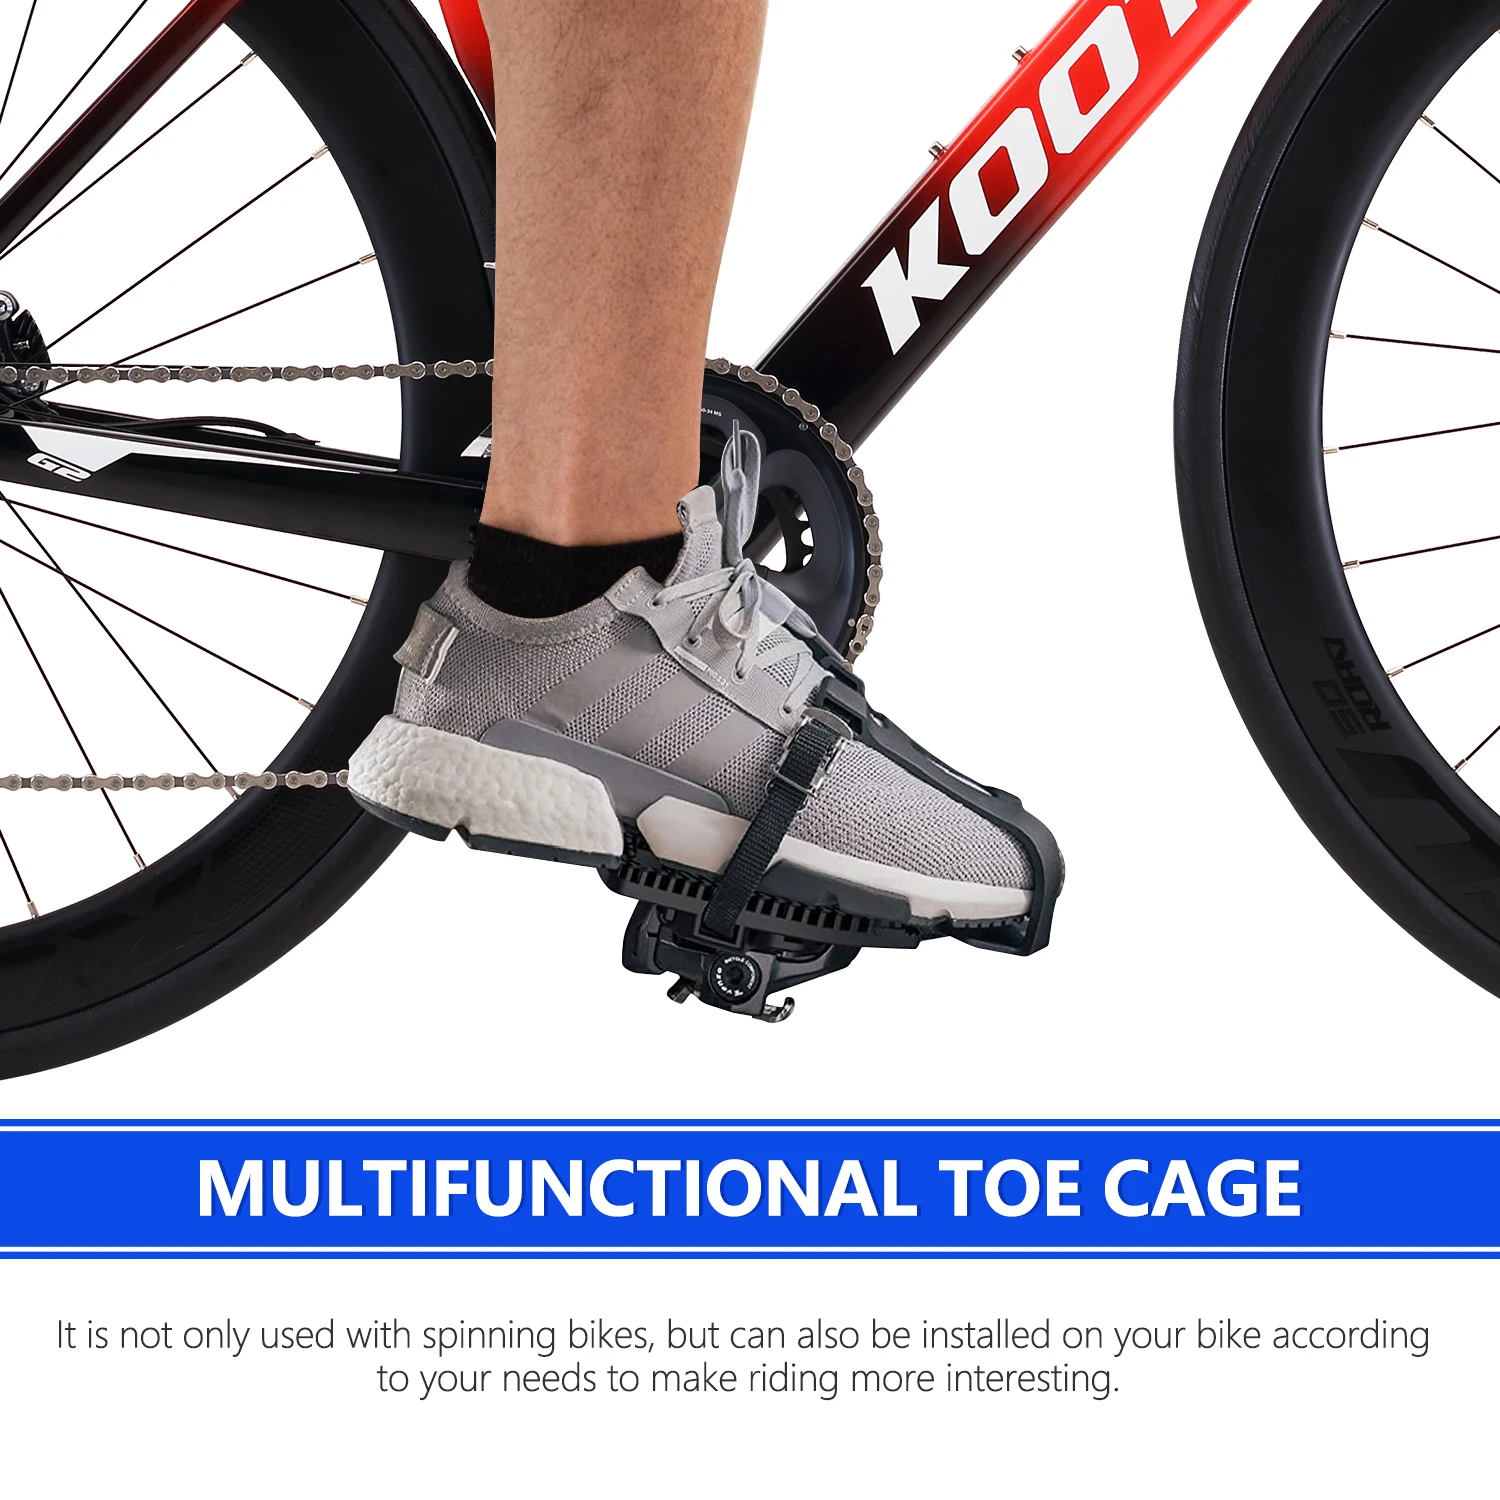 Spin Bike Pedal Compatible with Look Delta Clips - Ride with Sneakers-SAVA Carbon Bike